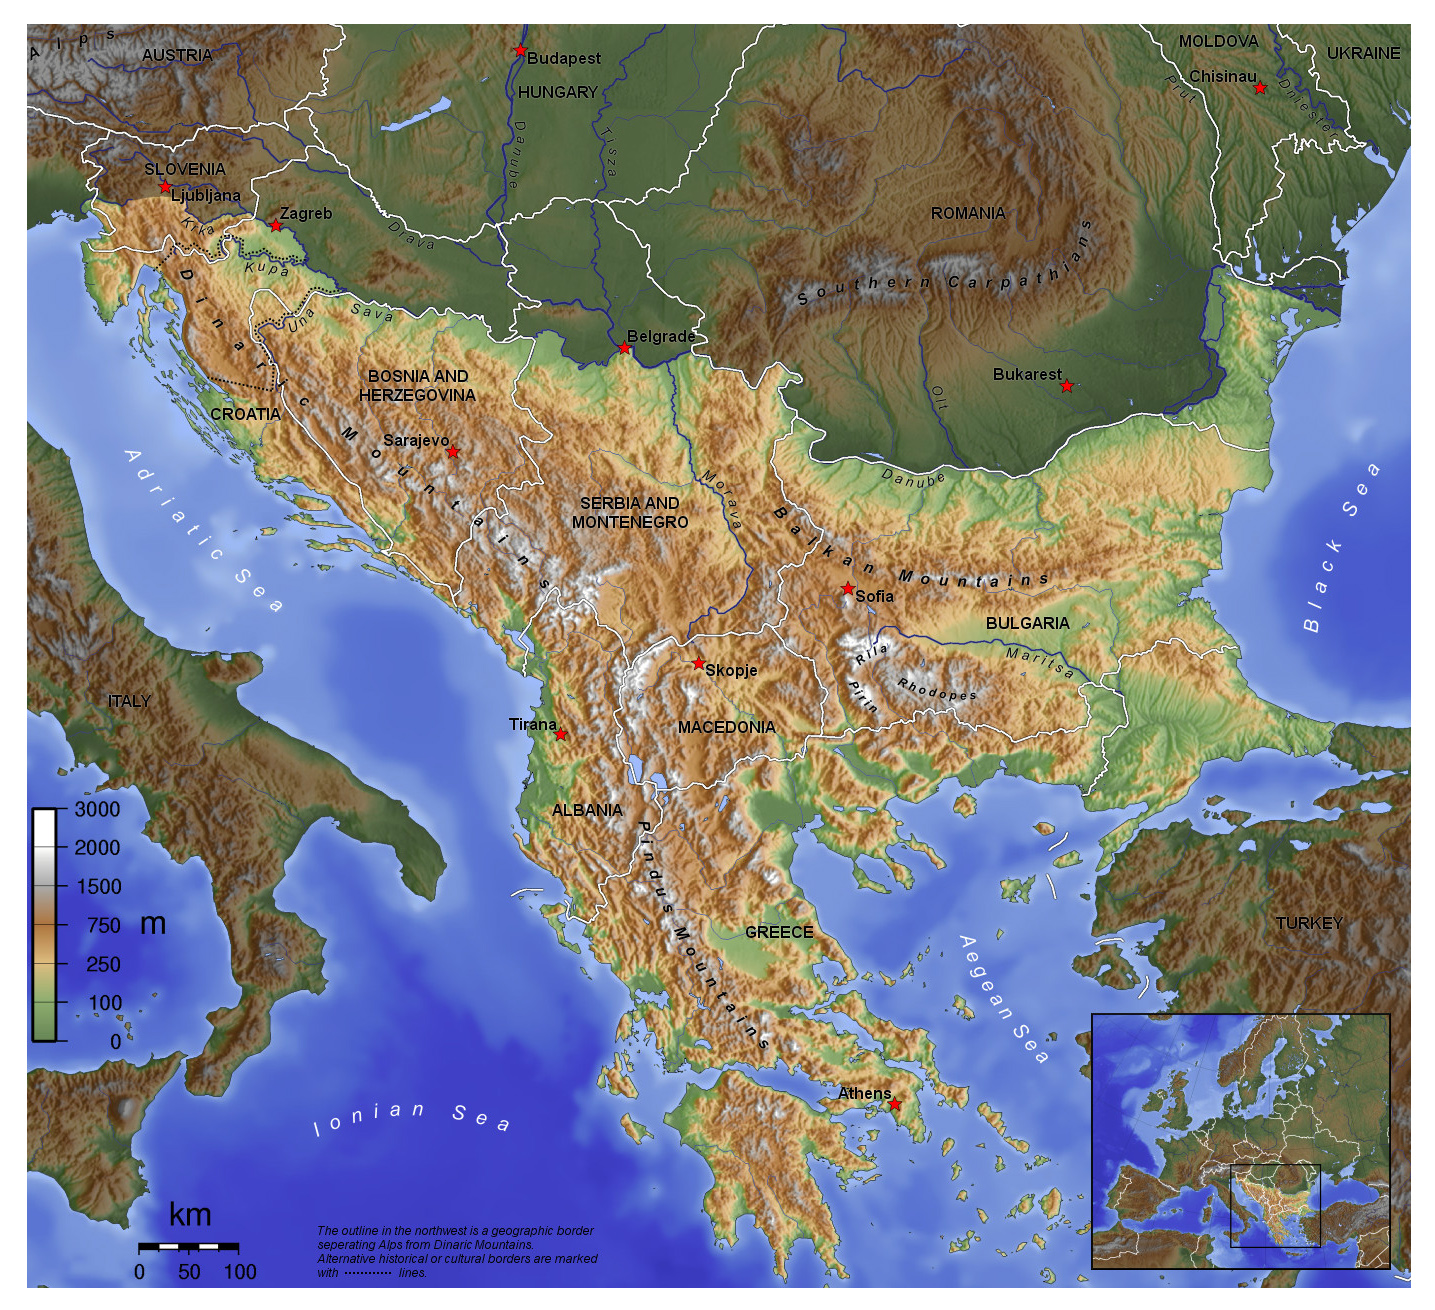 large-topographical-map-of-balkans.jpg